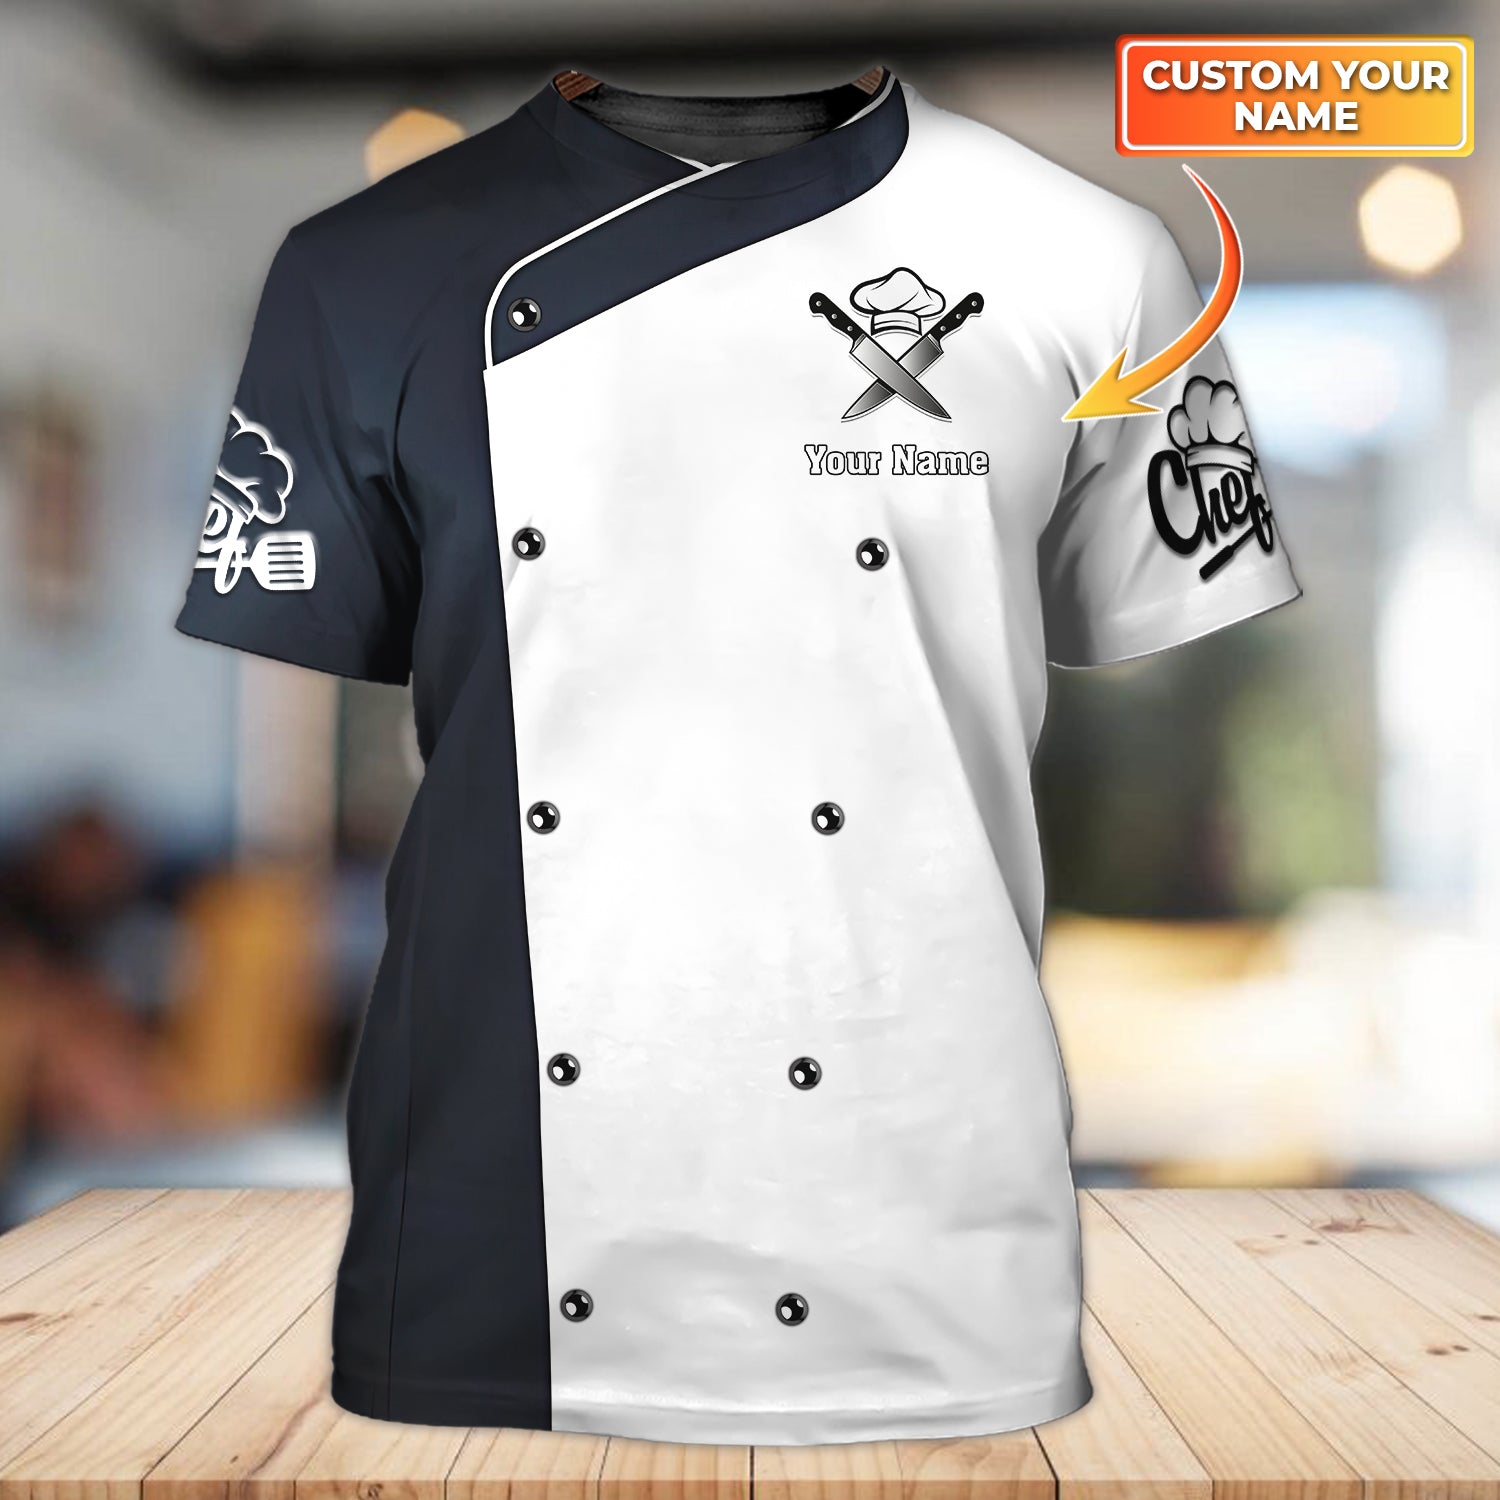 Chef, CooK, Personalized Name 3D Tshirt 34, RINC98